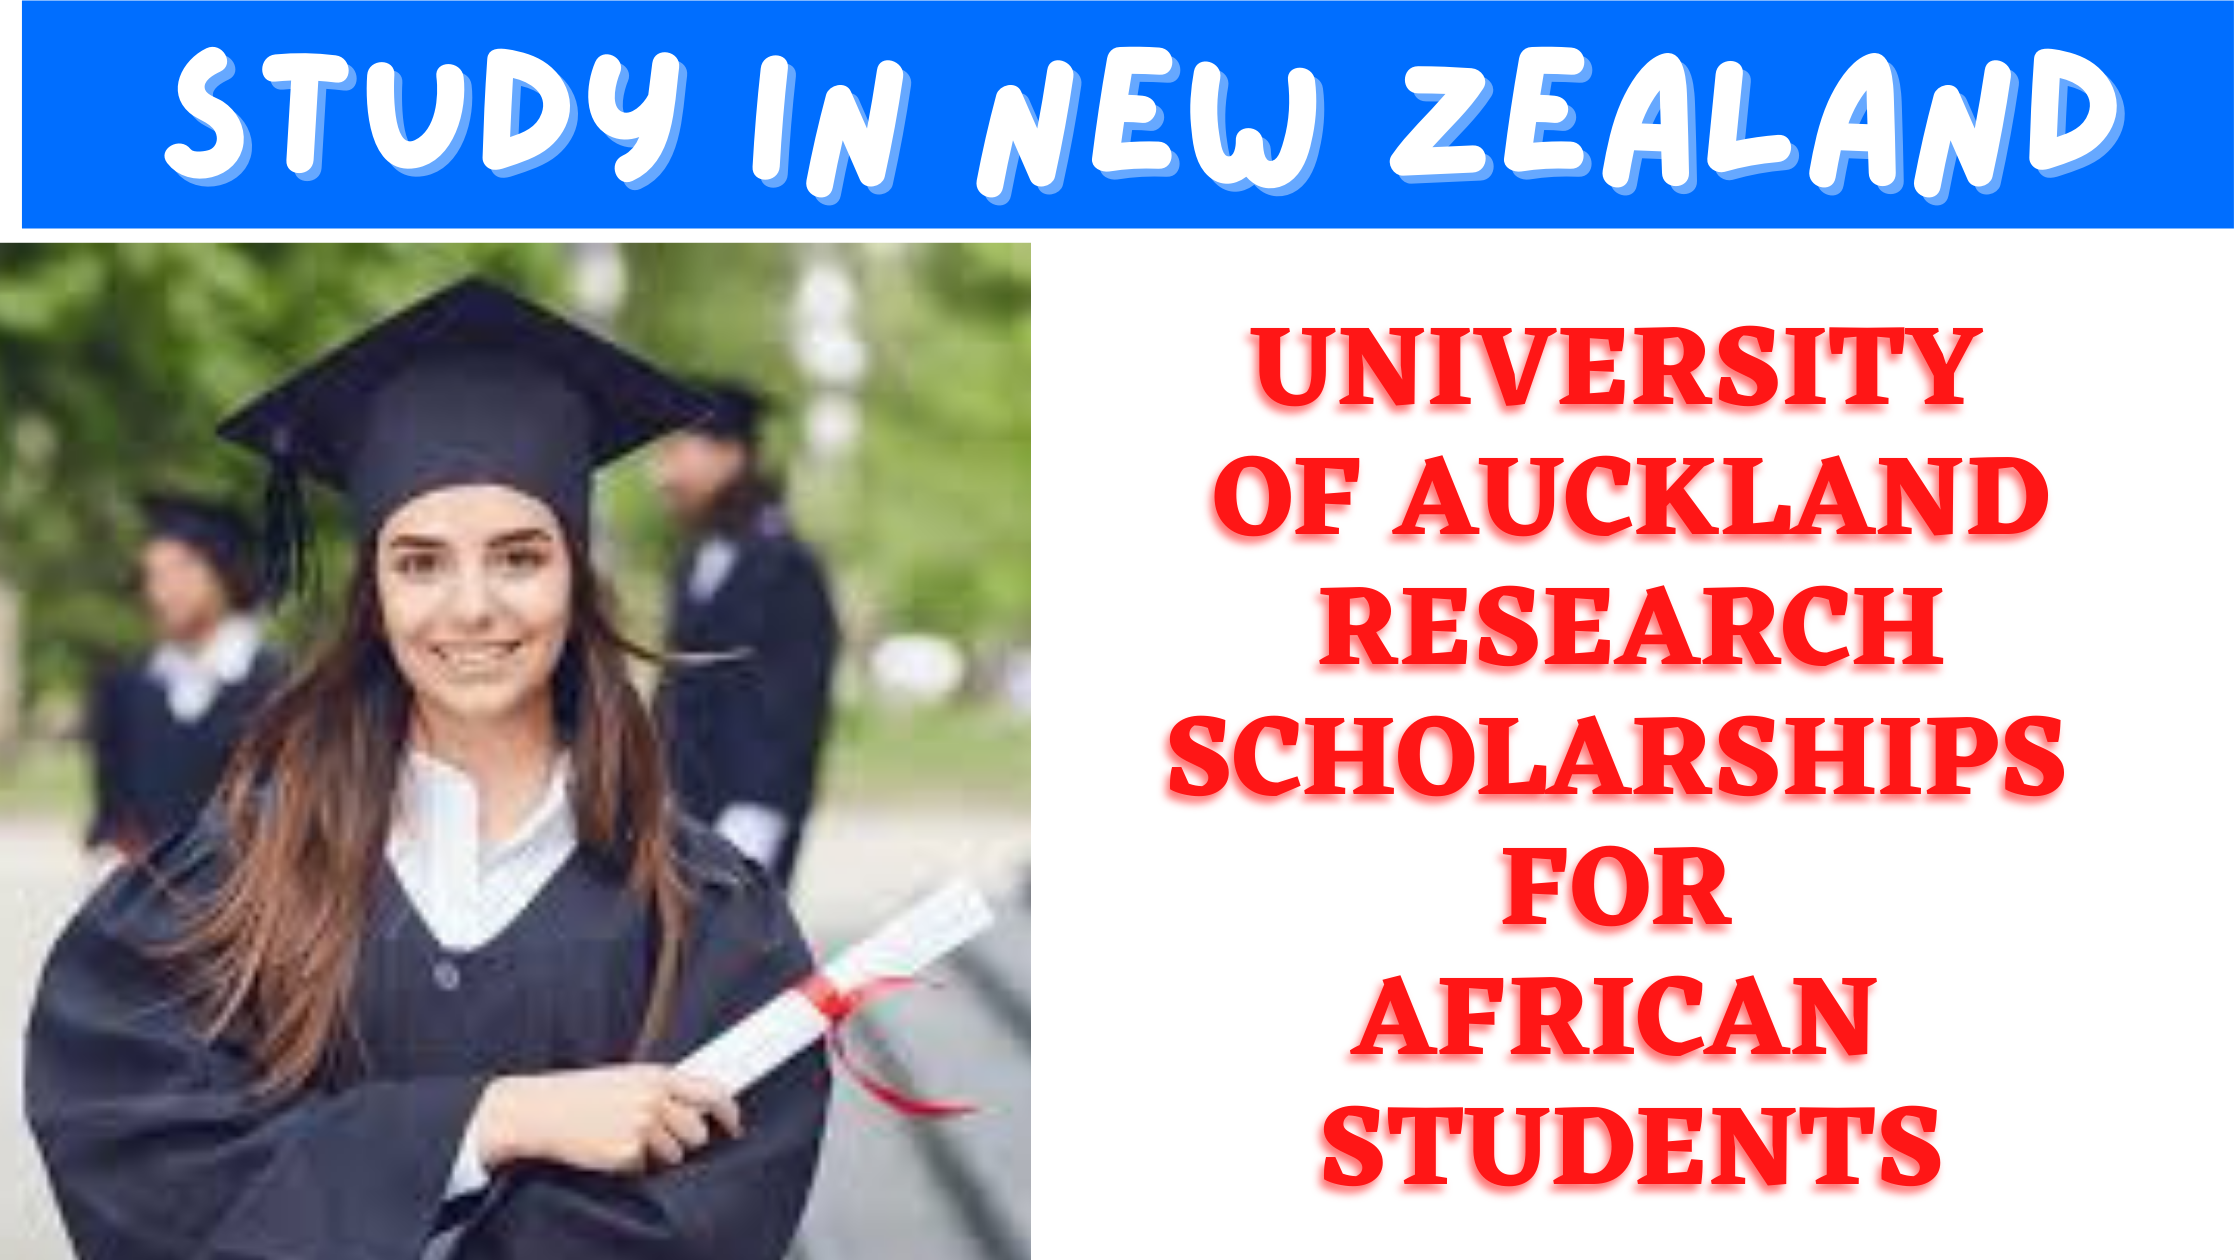 5 reasons why you should apply for the University of Auckland Research Scholarships for African Students in New Zealand